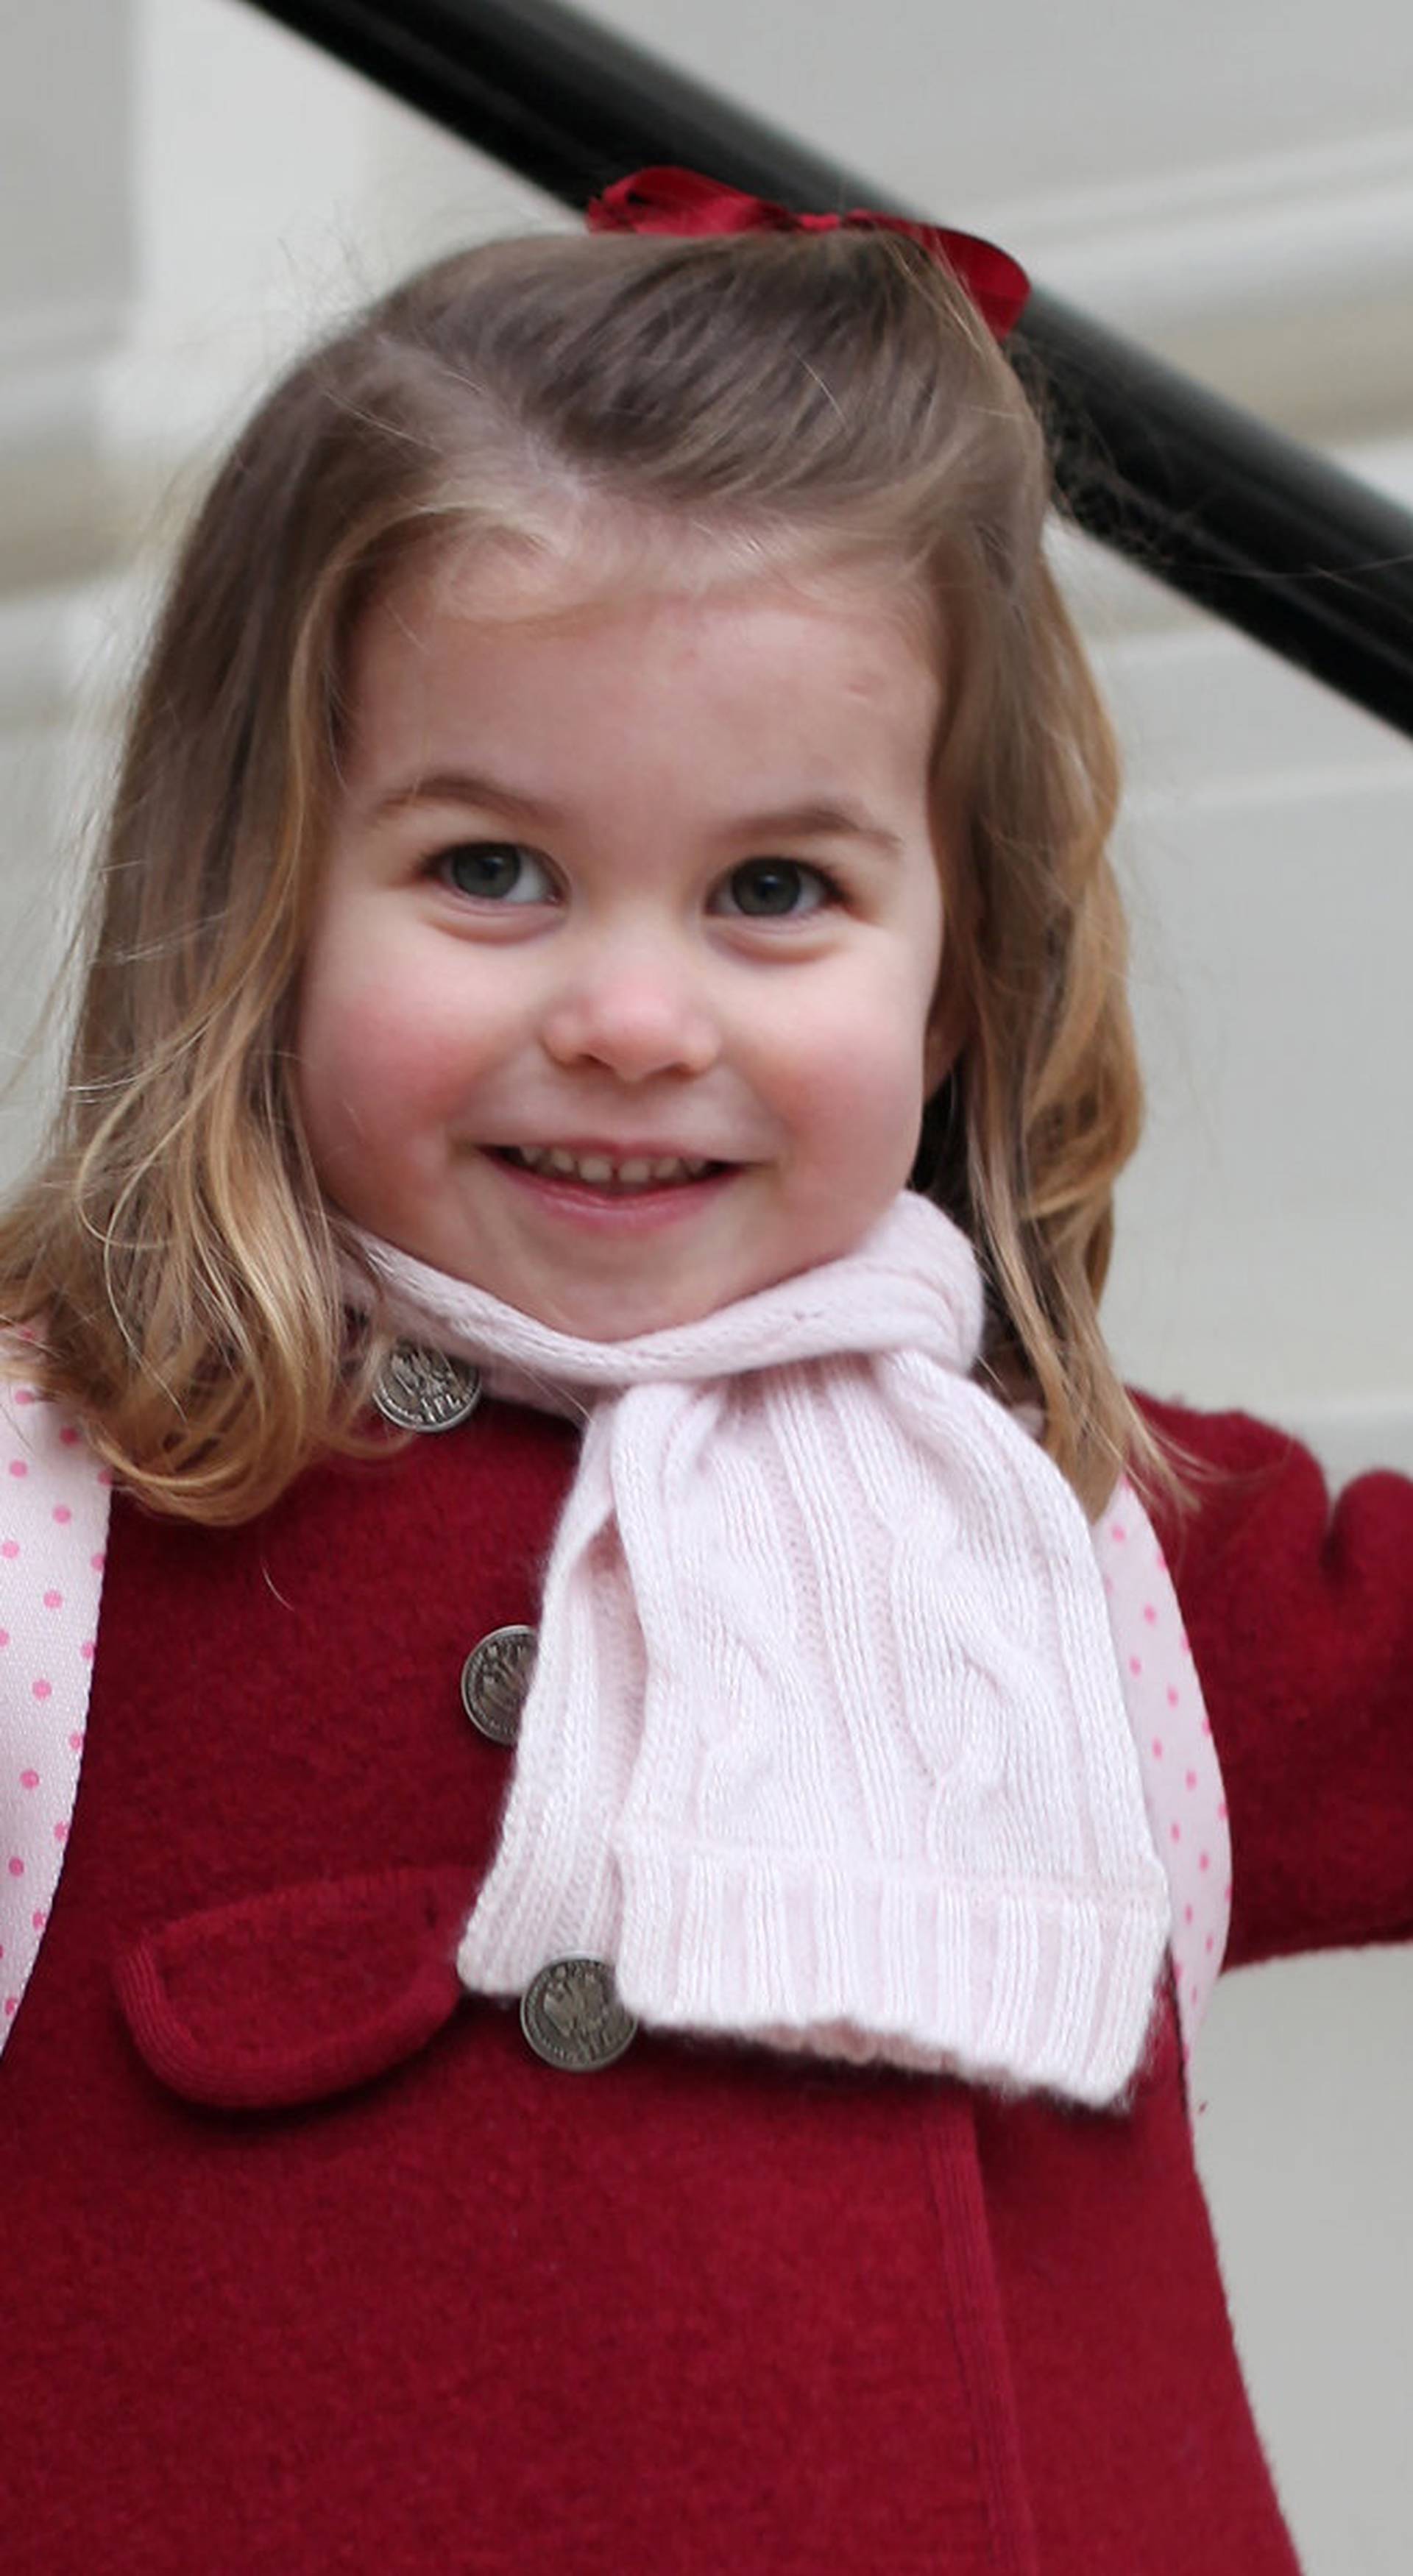 Britain's Princess Charlotte stands on the steps at Kensington Palace in a photograph taken taken by her mother and handed out by Britain's Prince William and Catherine, the Duchess of Cambridge